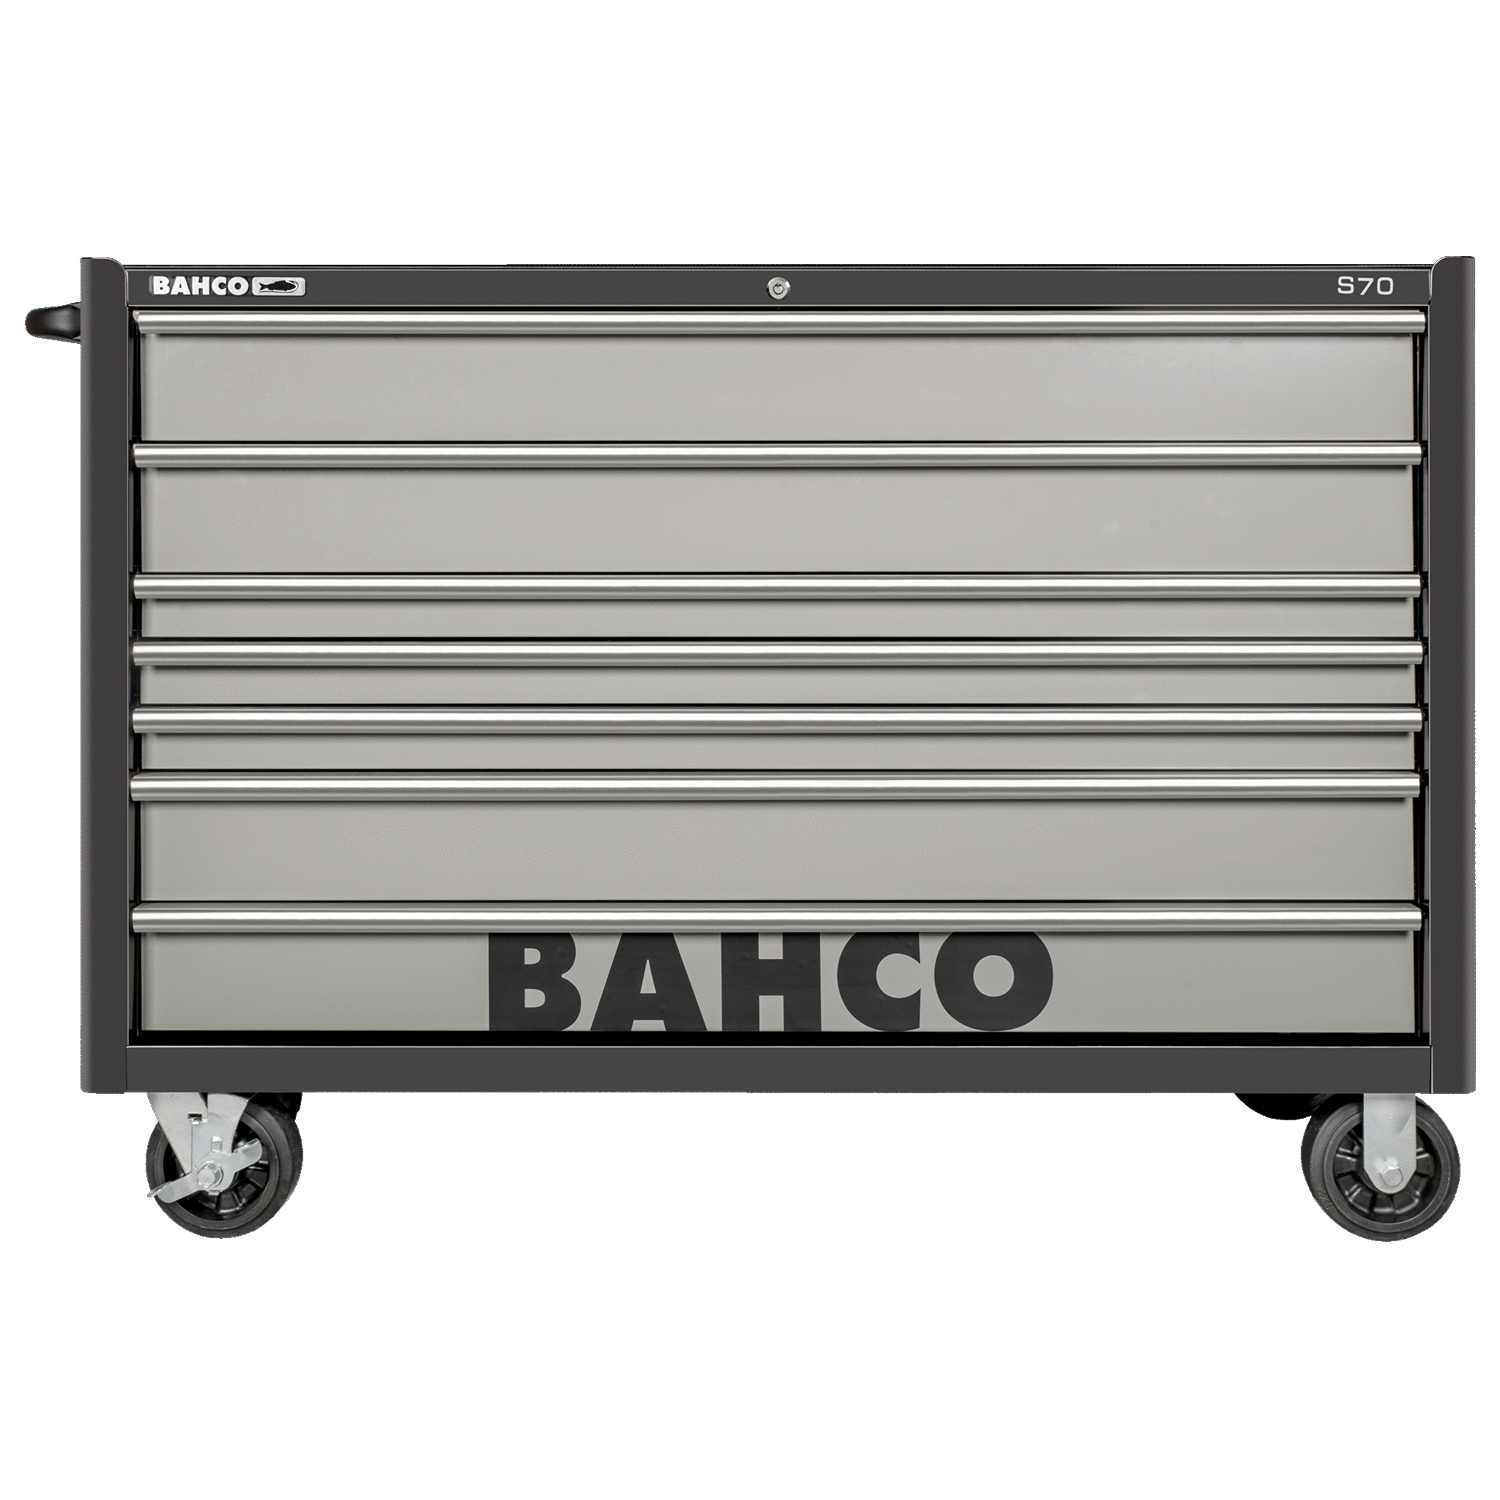 BAHCO 1476KXXL7BK 53" Tool Trolleys with 7 Drawers (BAHCO Tools) - Premium Tool Trolley from BAHCO - Shop now at Yew Aik.